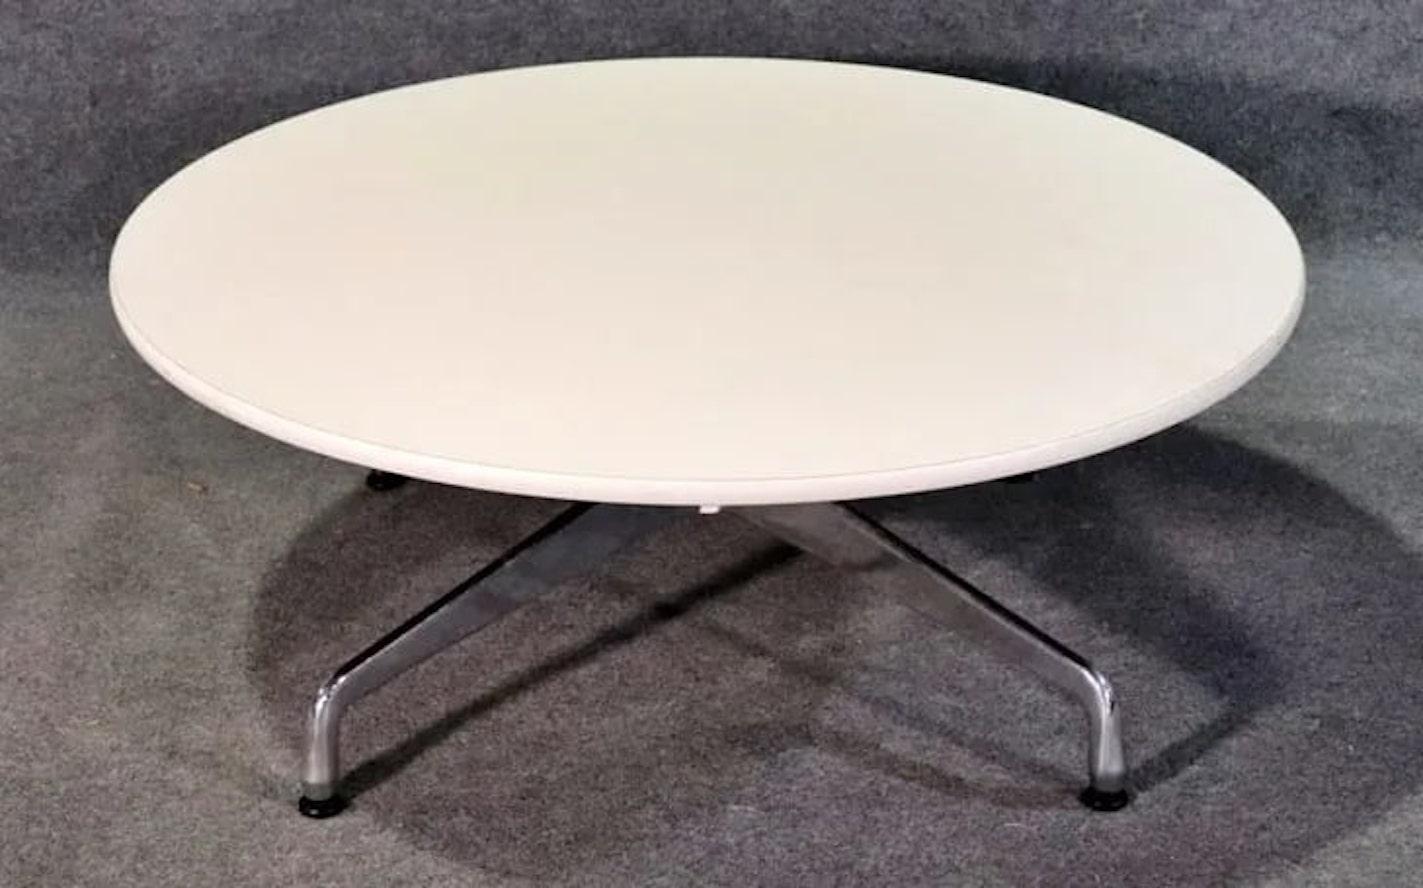 Round coffee table by Eames for Herman Miller. Polished metal base with white laminate top.
Please confirm location NY or NJ